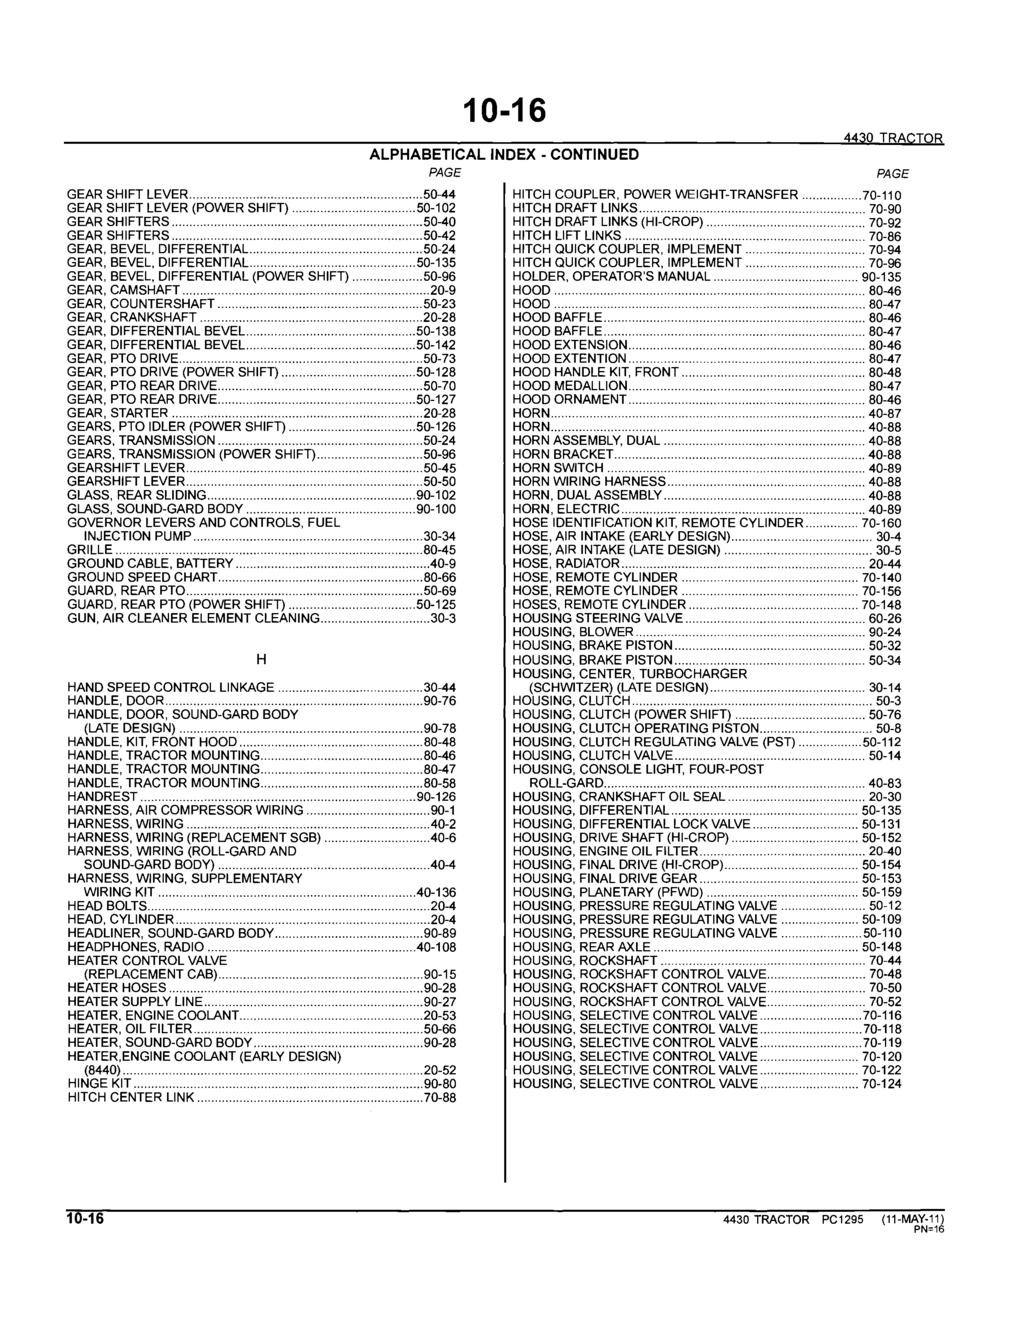 10-16 ALPHABETICAL INDEX - CONTINUED PAGE 4430 TRACTOR GEAR SHIFT LEVER... 50-44 HITCH COUPLER, POWER WEIGHT-TRANSFER... 70-110 GEAR SHIFT LEVER (POWER SHIFT)... 50-102 HITCH DRAFT LINKS.